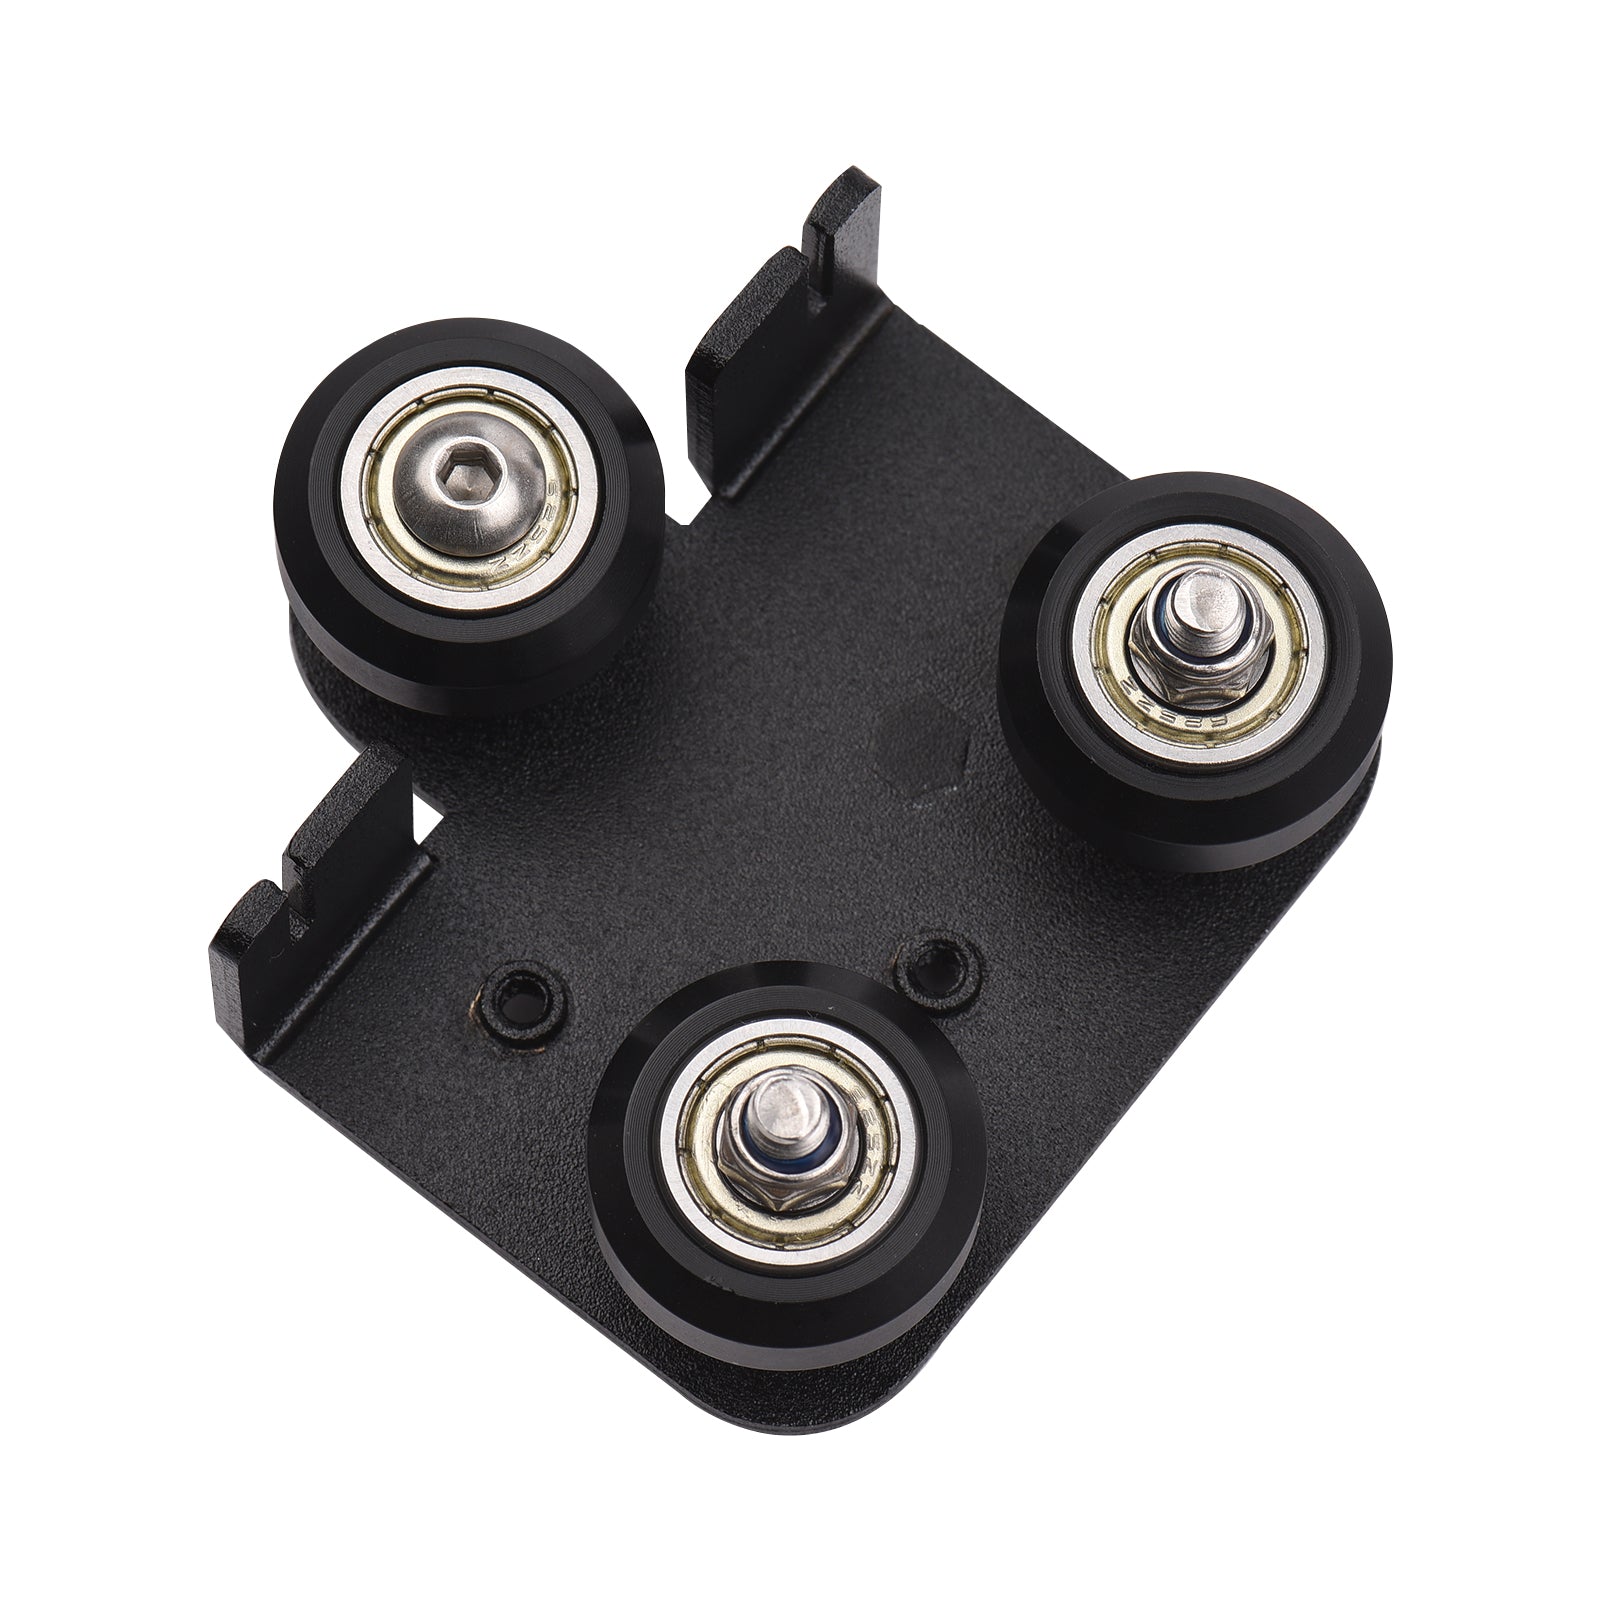 Extruder Back Support Plate with Pulley 3D Printer Part Accessory for Ender 3 Ender 3X Pro CR-10 CR-10S S4 S5 Series 3D Printers 1Pcs